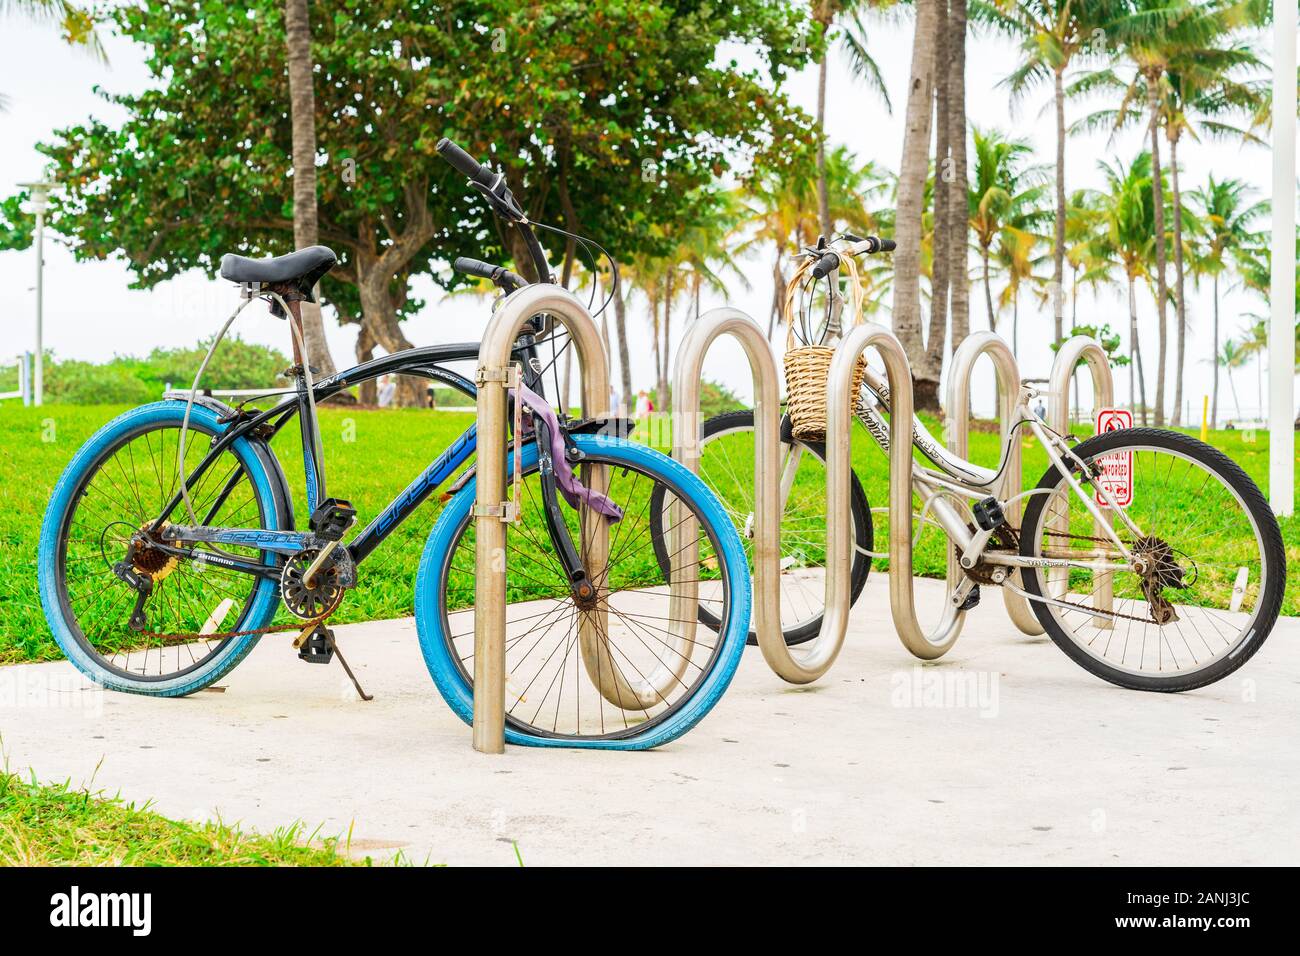 Miami, Florida - December 30, 2019: Two Parked Bicycles One With a Flat Tire in Ocean Drive, Miami, Florida. Stock Photo